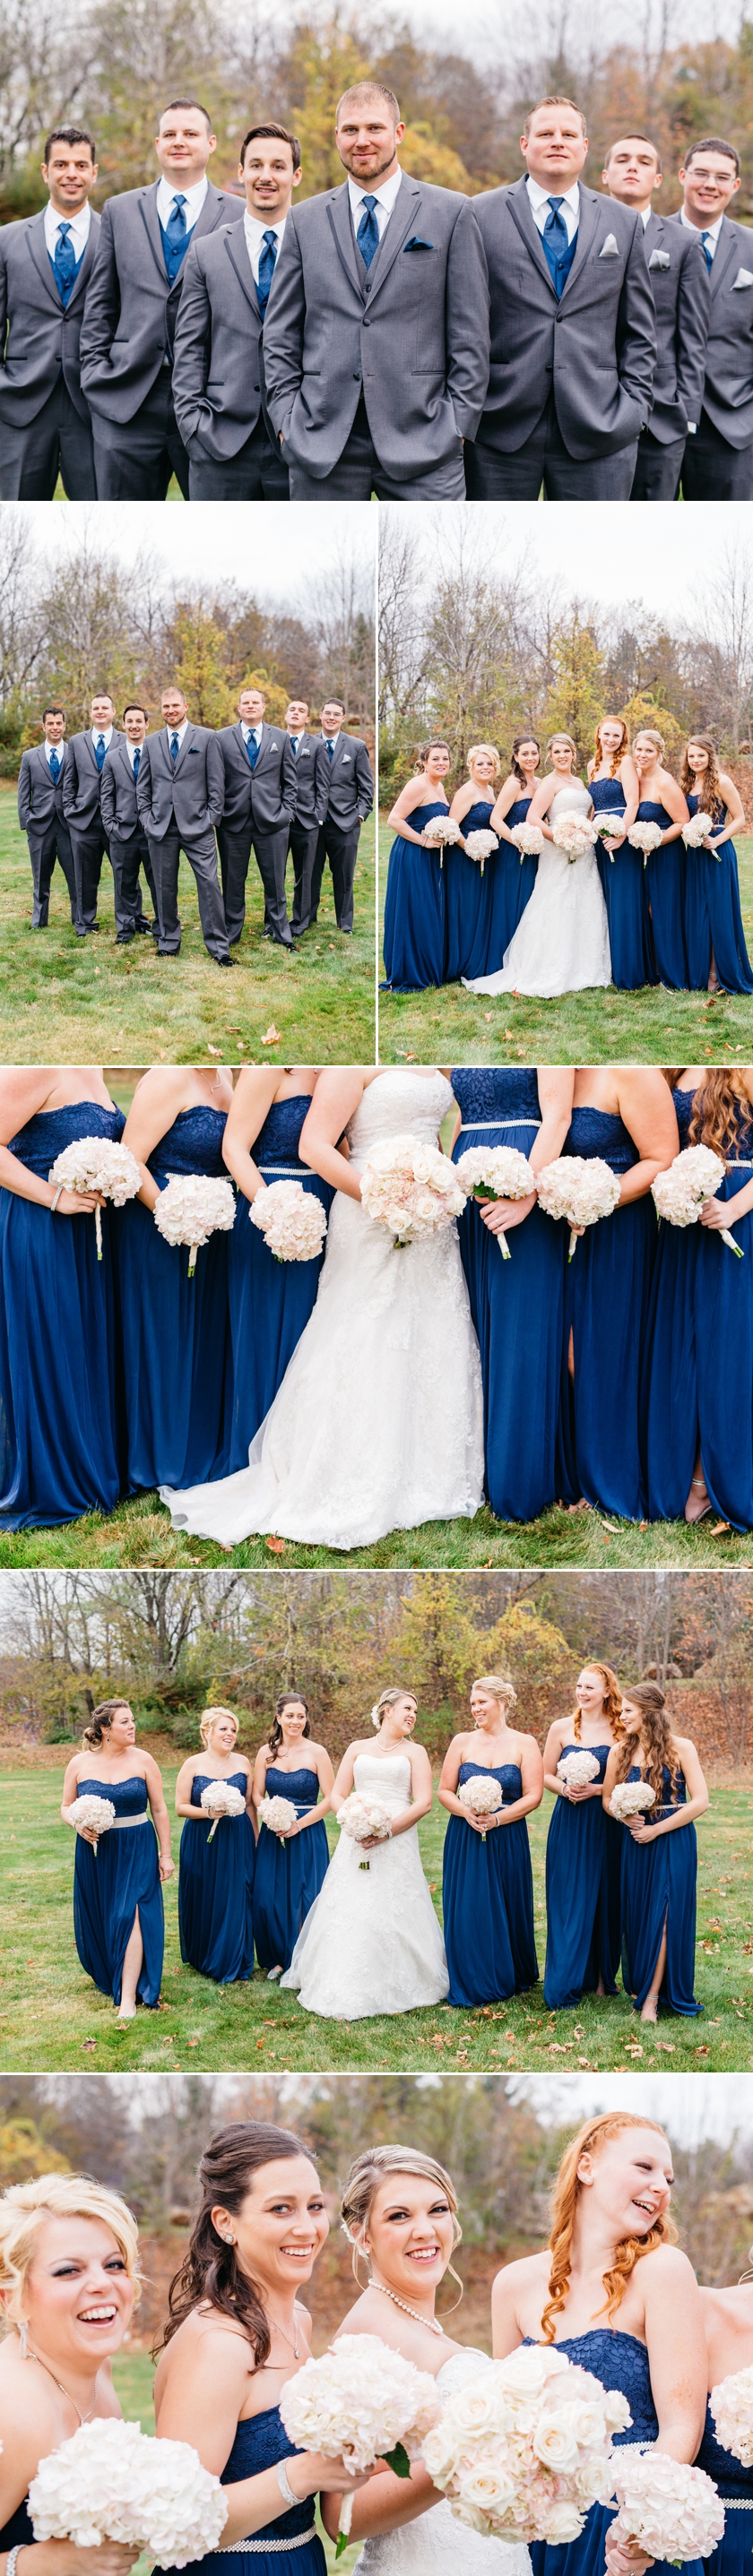 photo collage of bridal party at nichole and george's classic wedding at the wight barn in sturbridge massachusetts